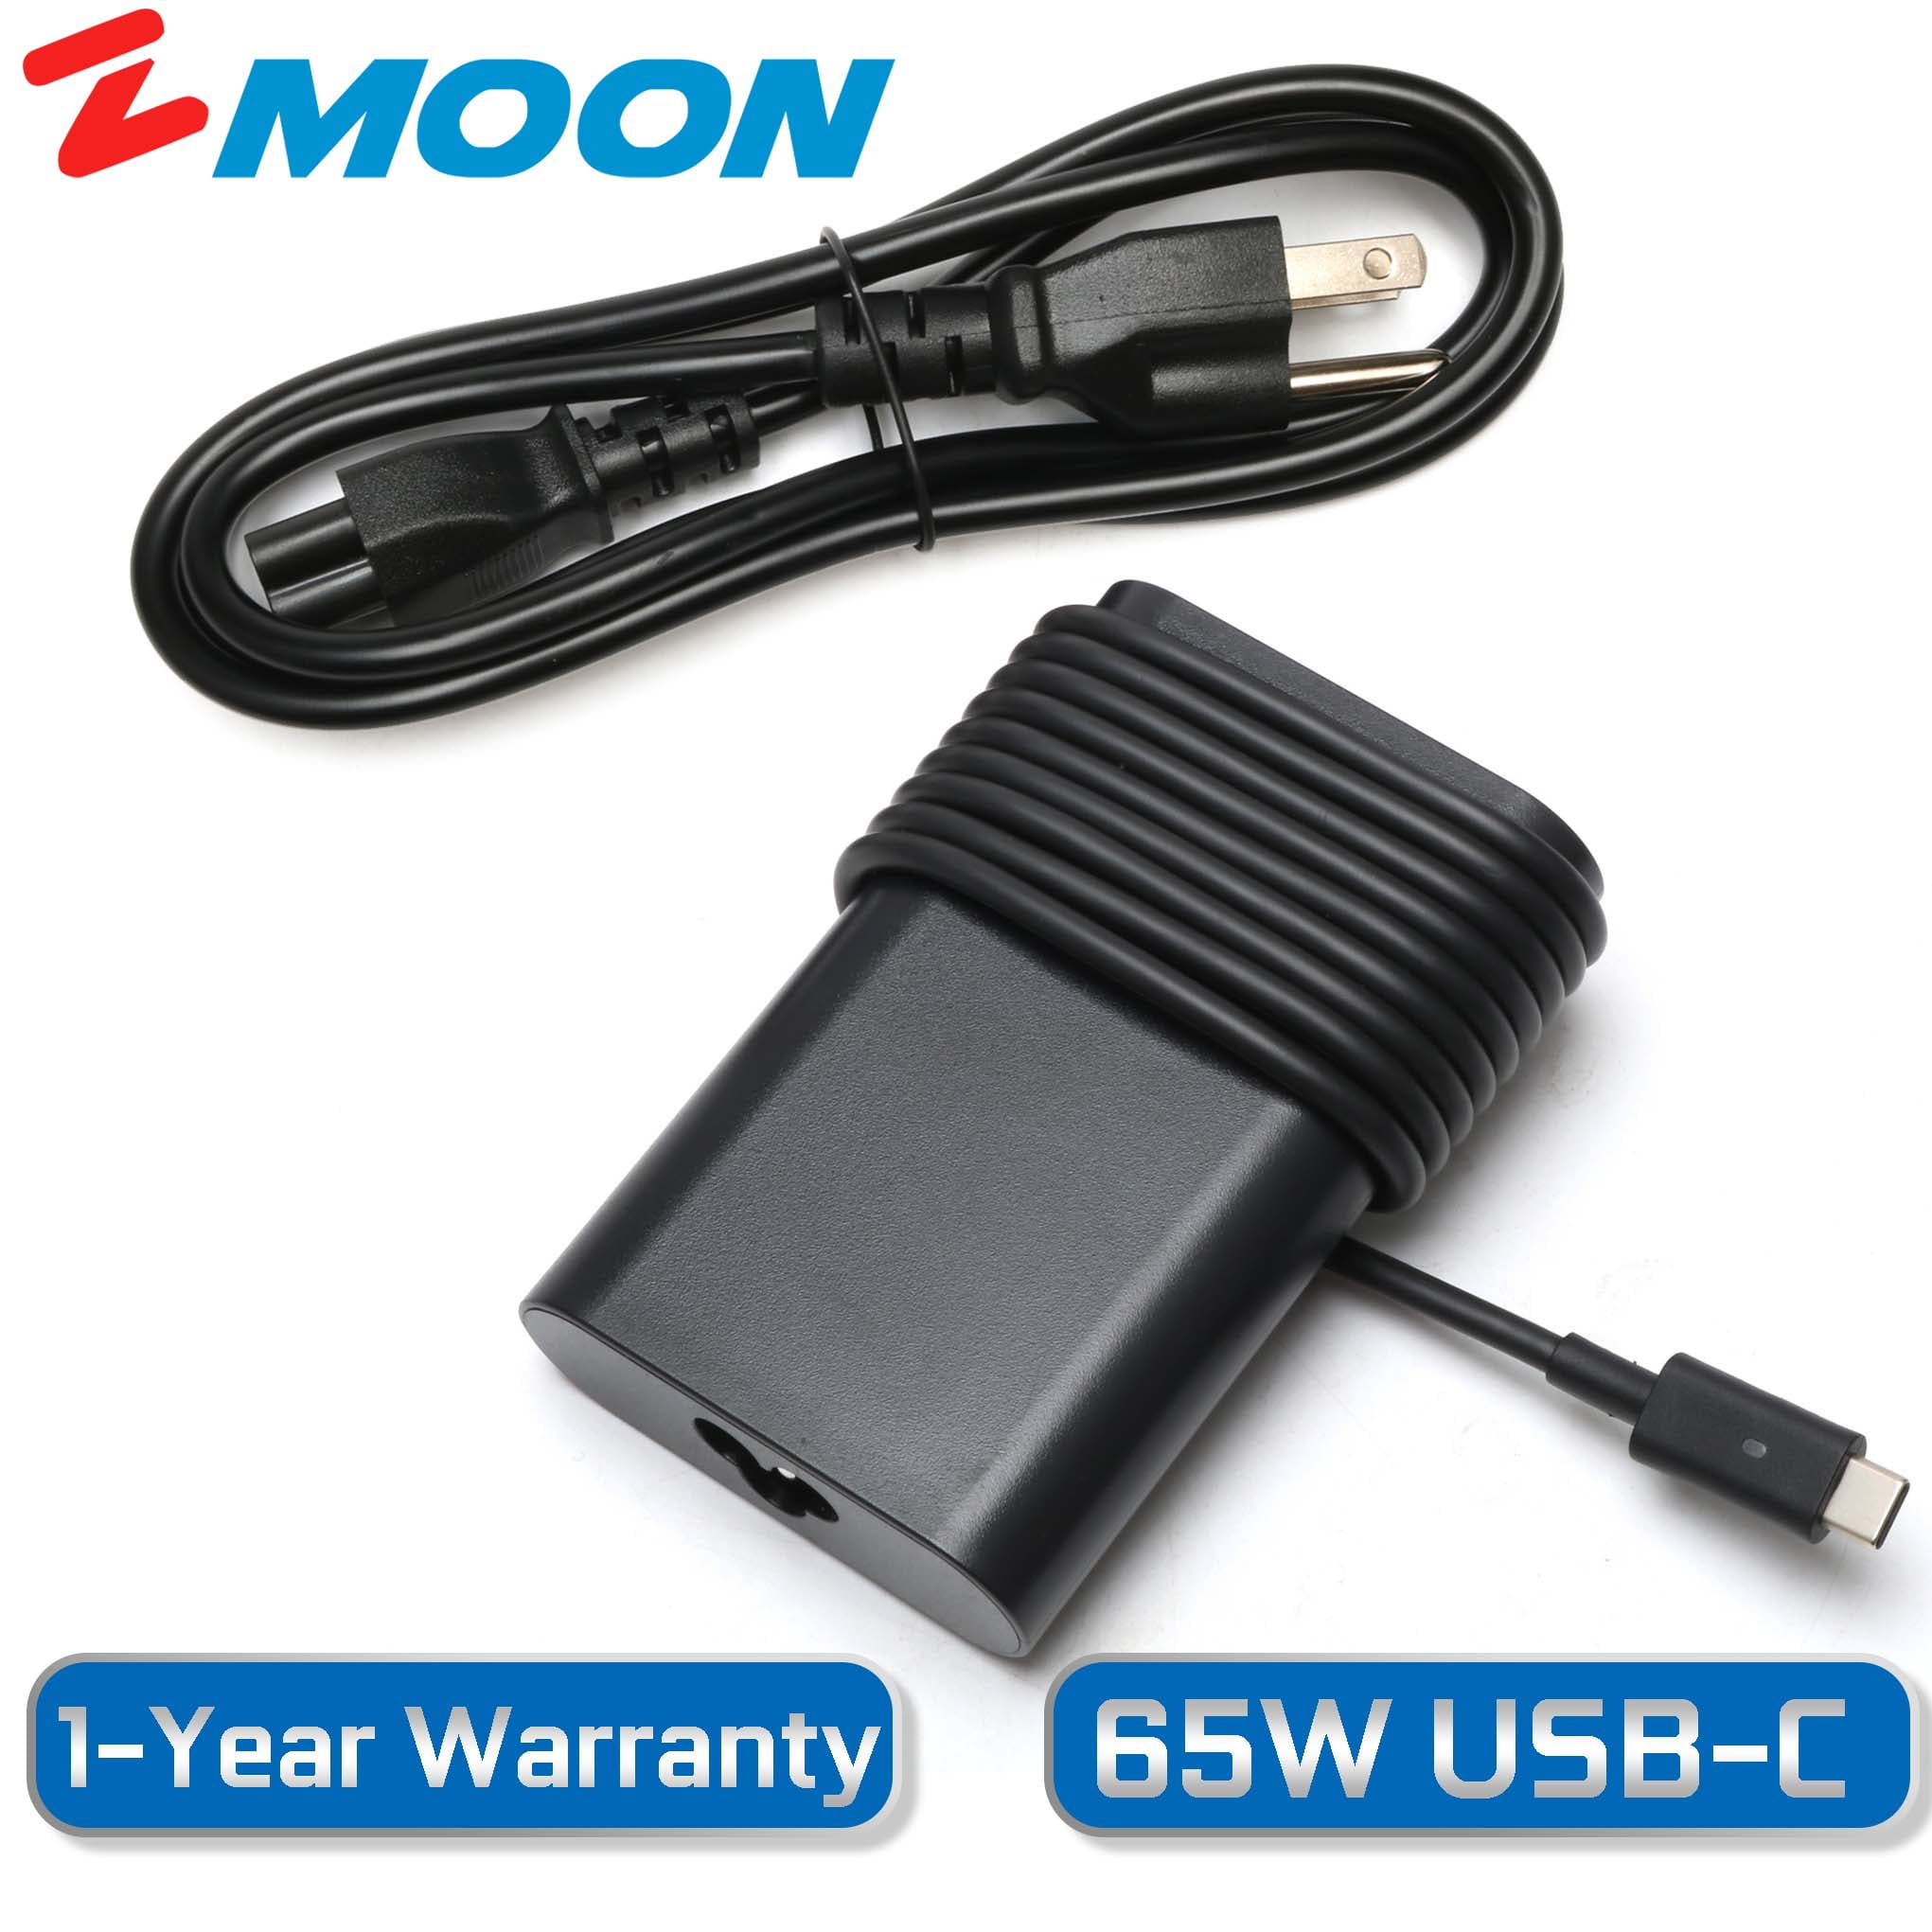 65W 20V USB-C Laptop Power Adapter Charger for Dell Latitude 7389 2-in-1 13 7370 